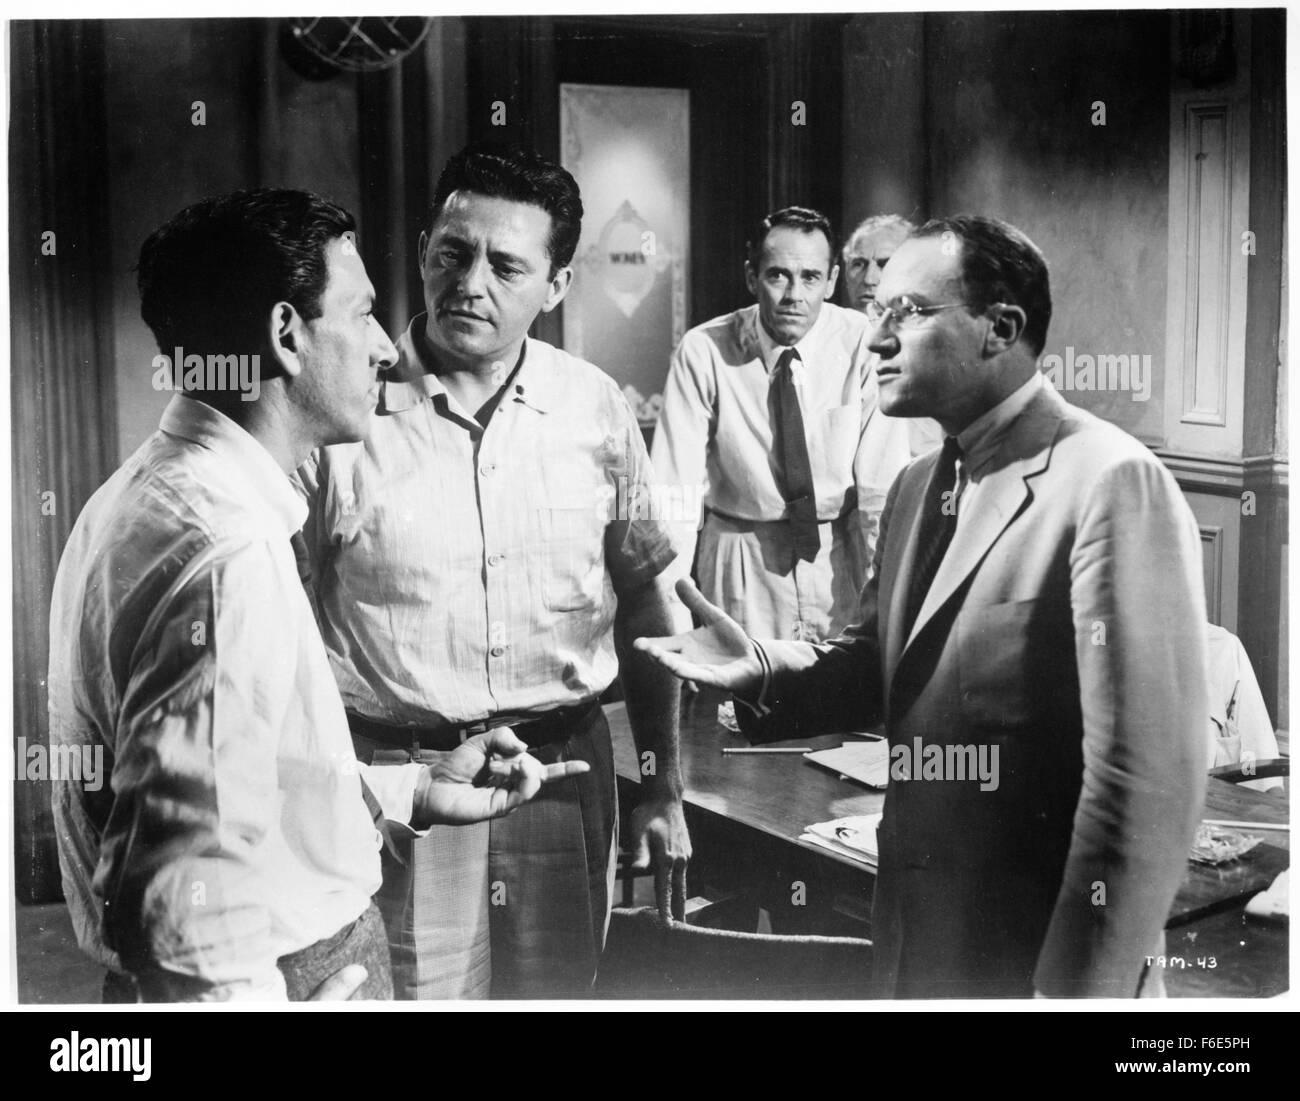 RELEASE DATE: July 29, 1957. MOVIE TITLE: 12 Angry Men. STUDIO: Orion-Nova Productions. PLOT: The defence and the prosecution have rested and the jury is filing into the jury room to decide if a young Spanish-American is guilty or innocent of murdering his father. What begins as an open and shut case of murder soon becomes a mini-drama of each of the jurors' prejudices and preconceptions about the trial, the accused, and each other. Based on the play, all of the action takes place on the stage of the jury room. PICTURED: HENRY FONDA as Juror Stock Photo